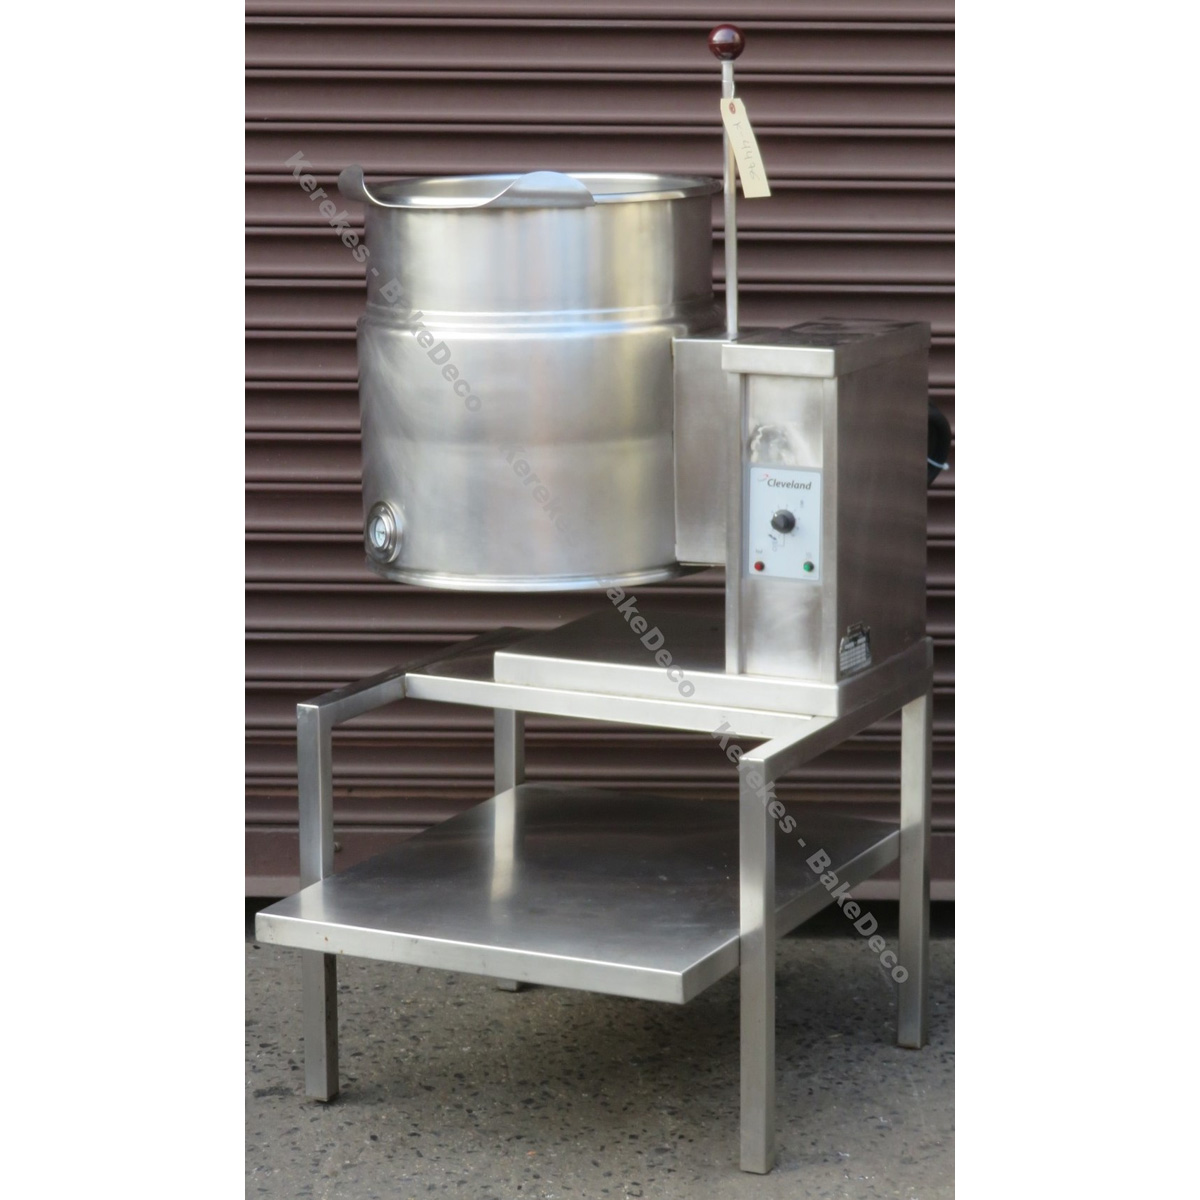 Cleveland Kettle 10 gal, Electric, KET-10T, Used Great Condition